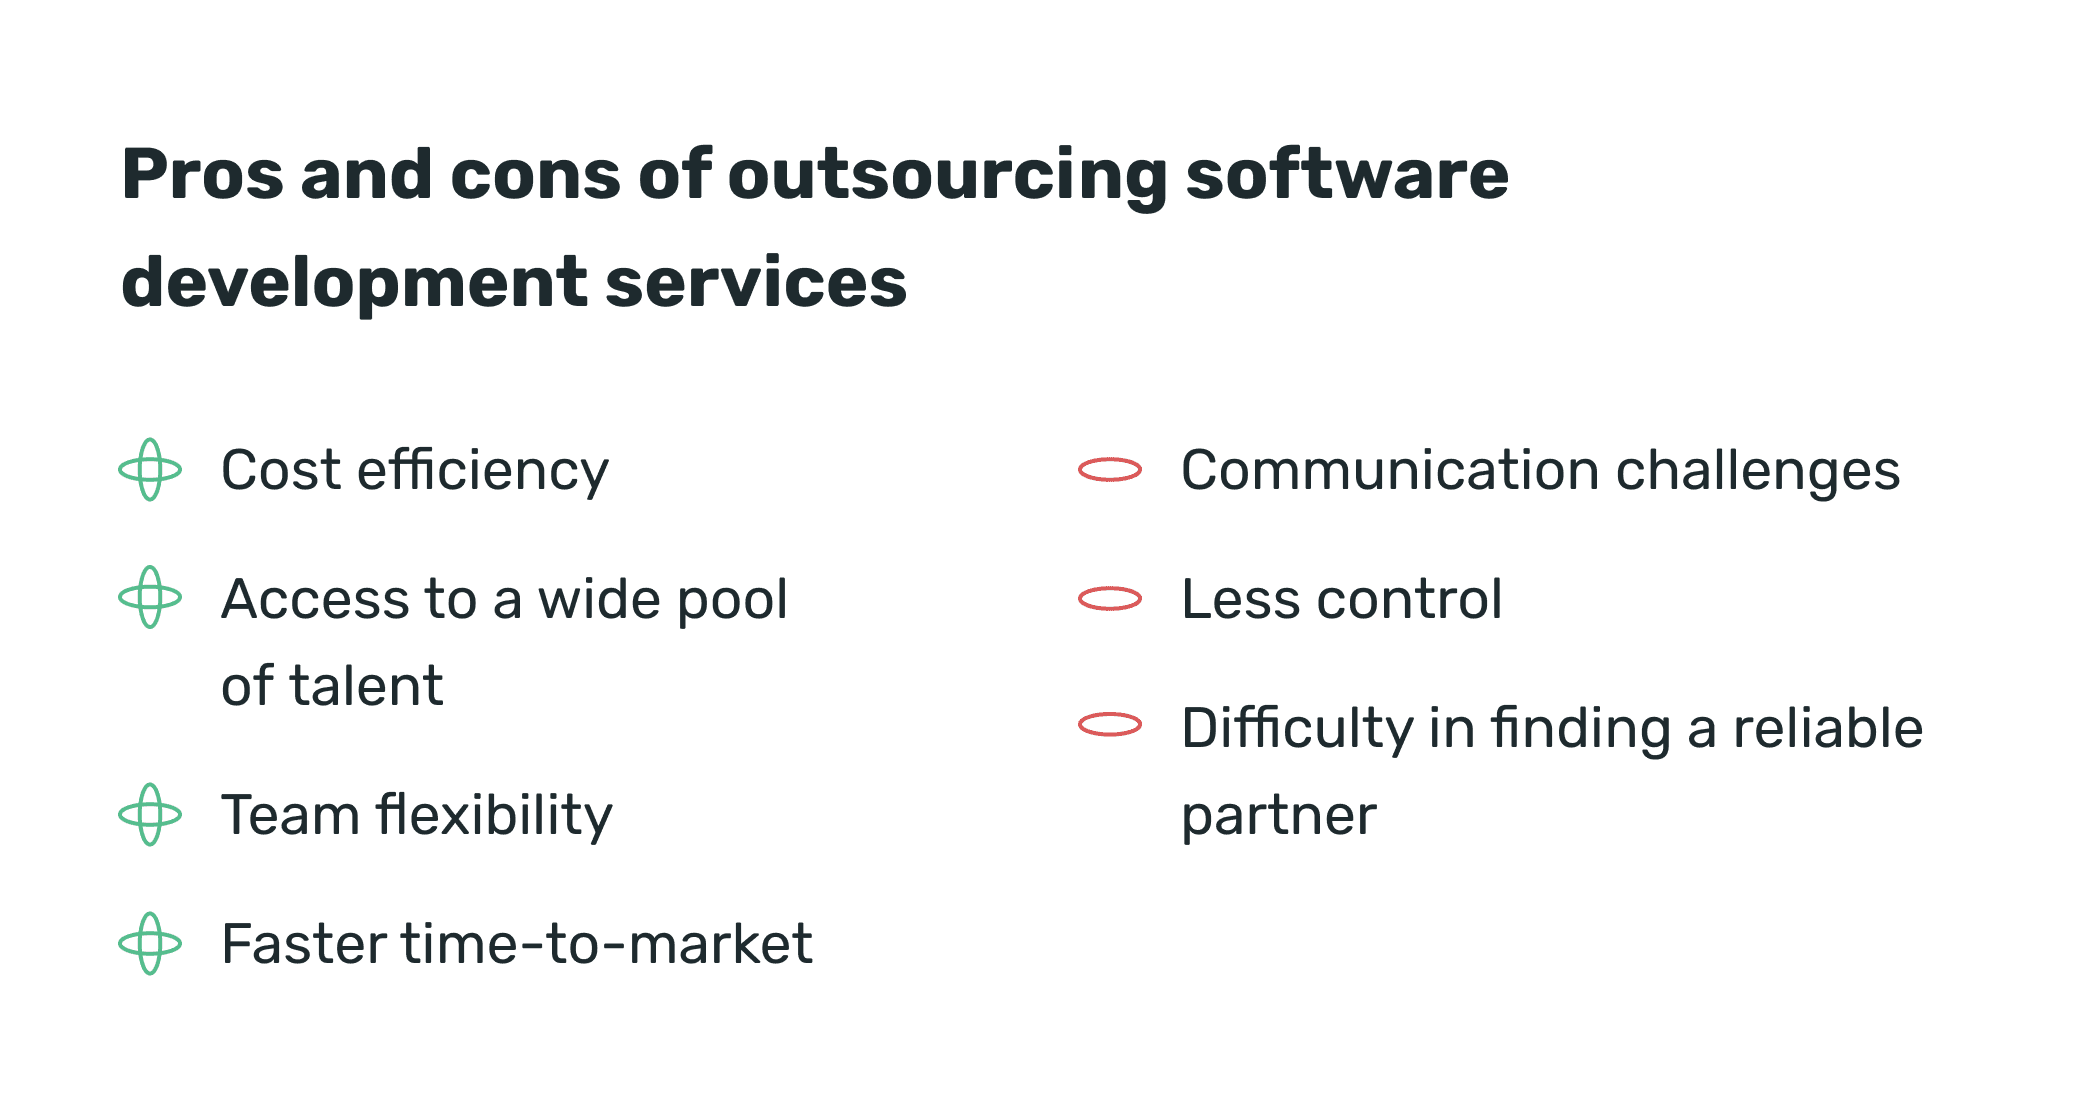 Pros and cons of outsourcing software development services